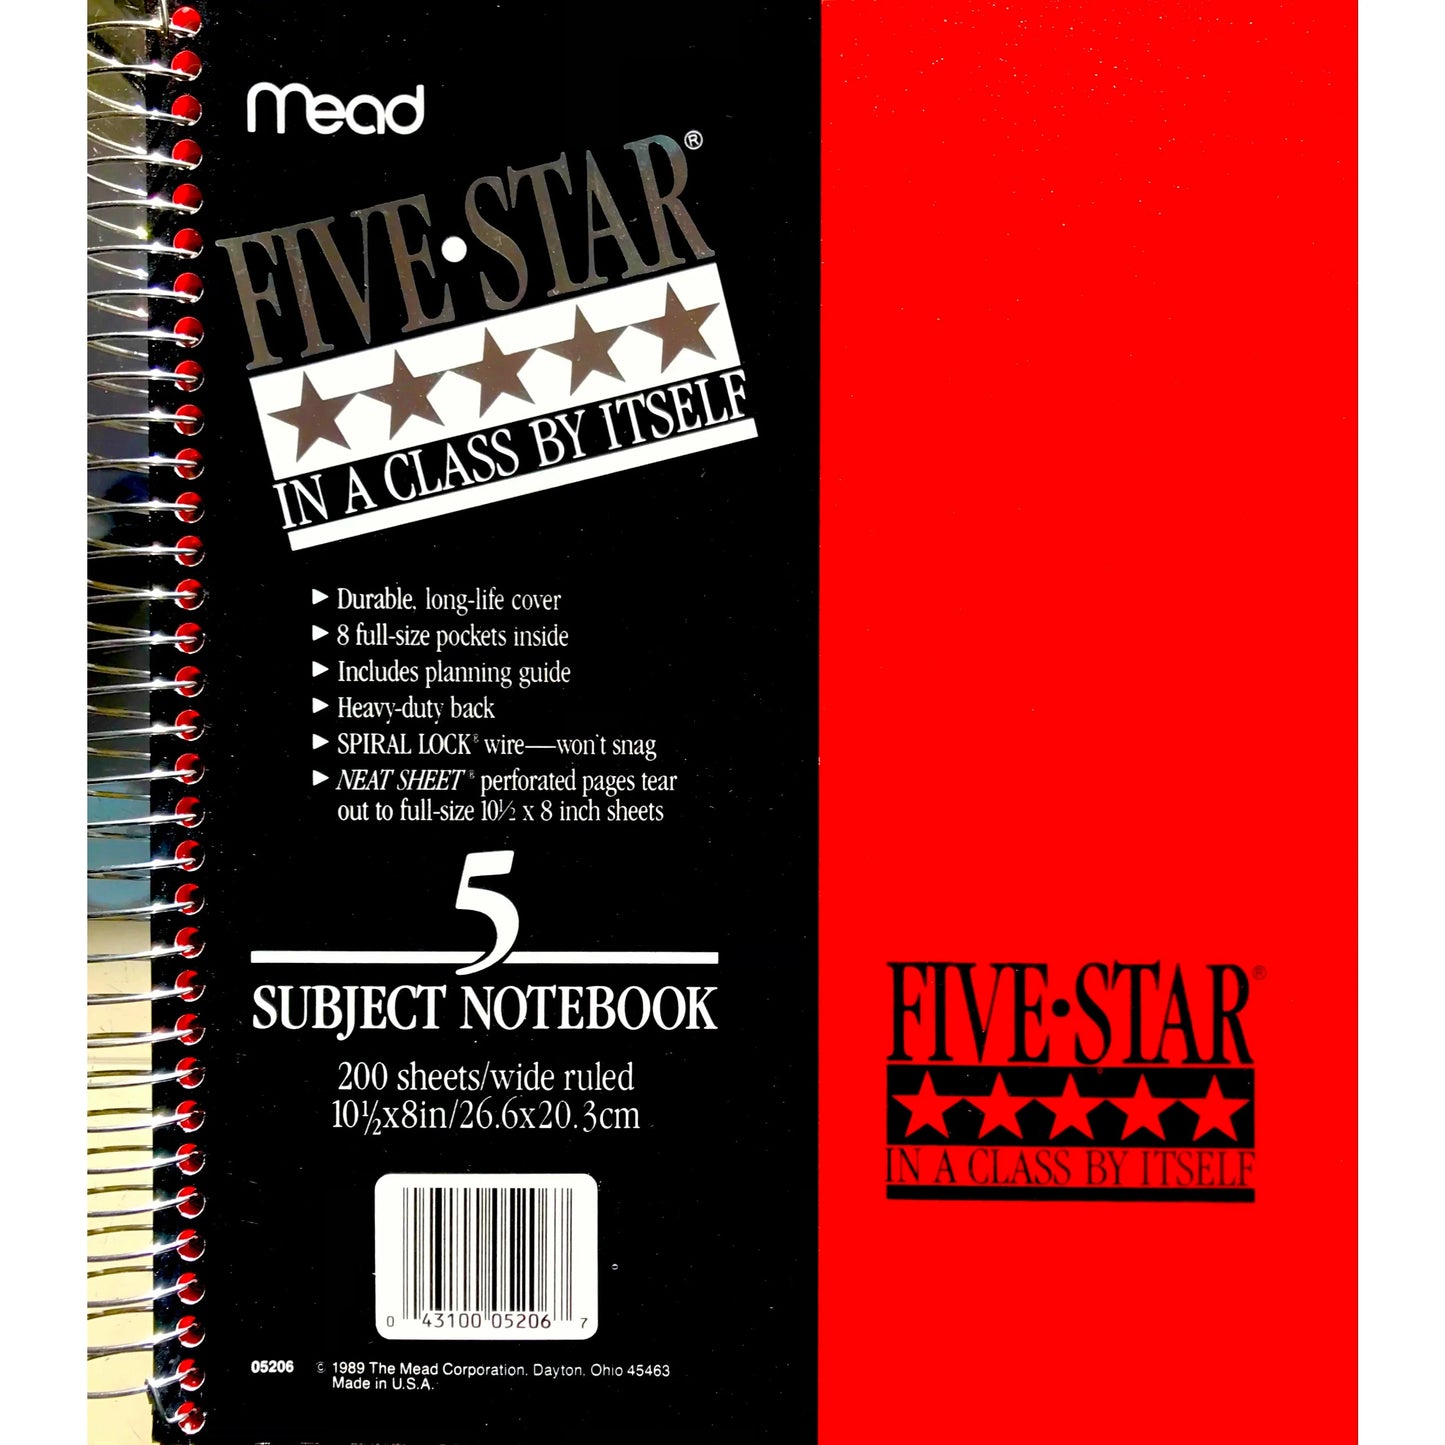 Mead Five Star Five Subject Spiral Notebook - 200 Sheets